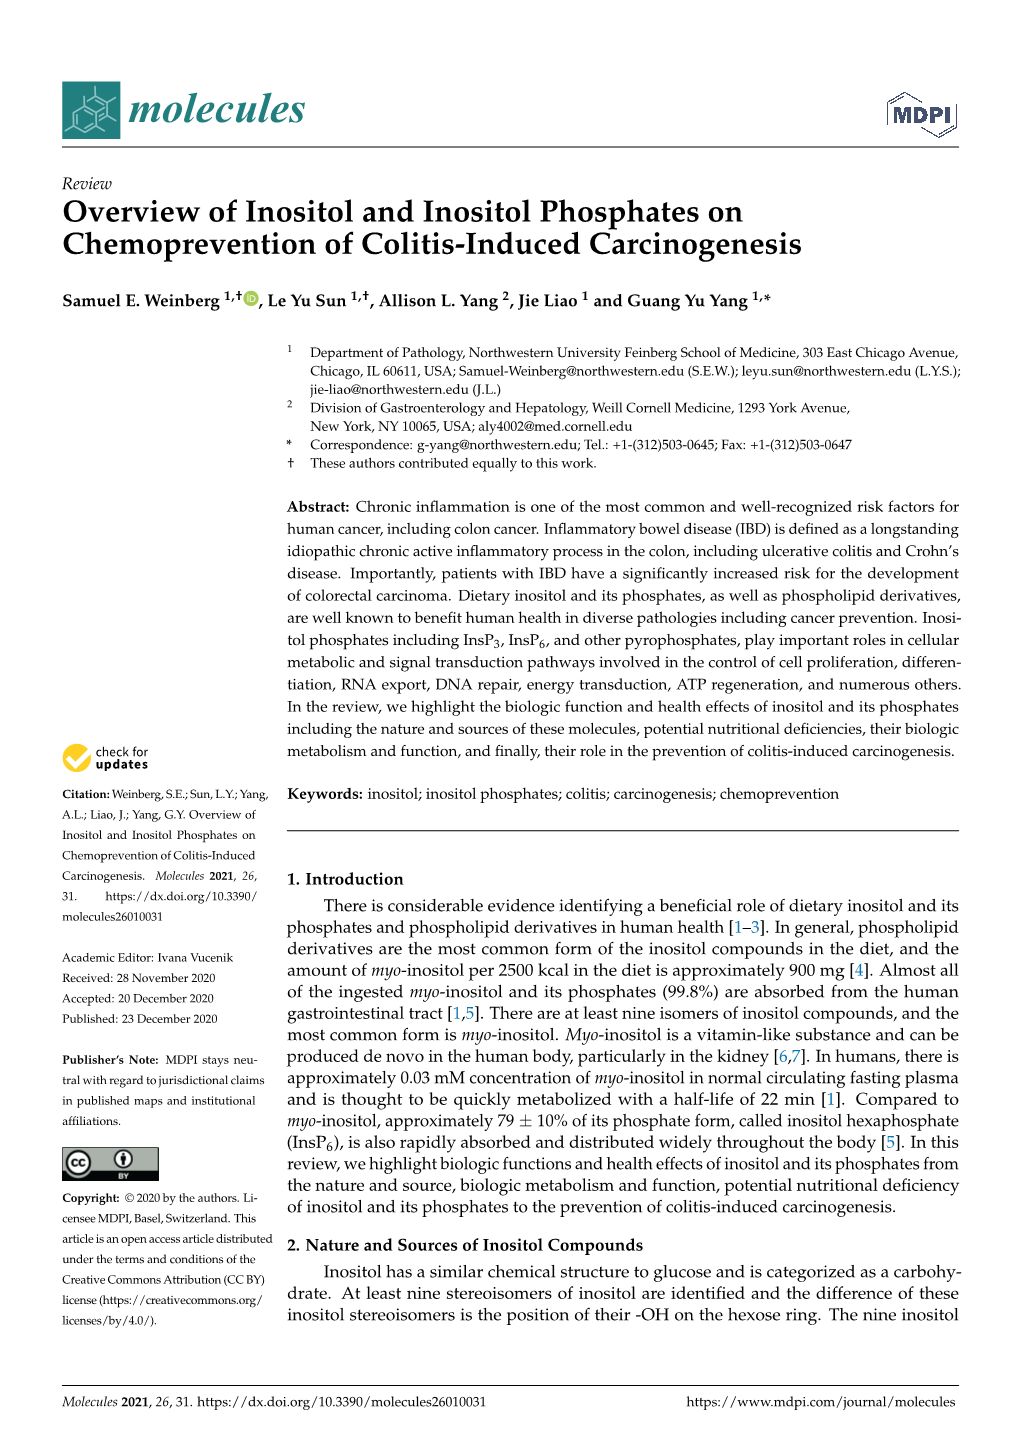 Overview of Inositol and Inositol Phosphates on Chemoprevention of Colitis-Induced Carcinogenesis